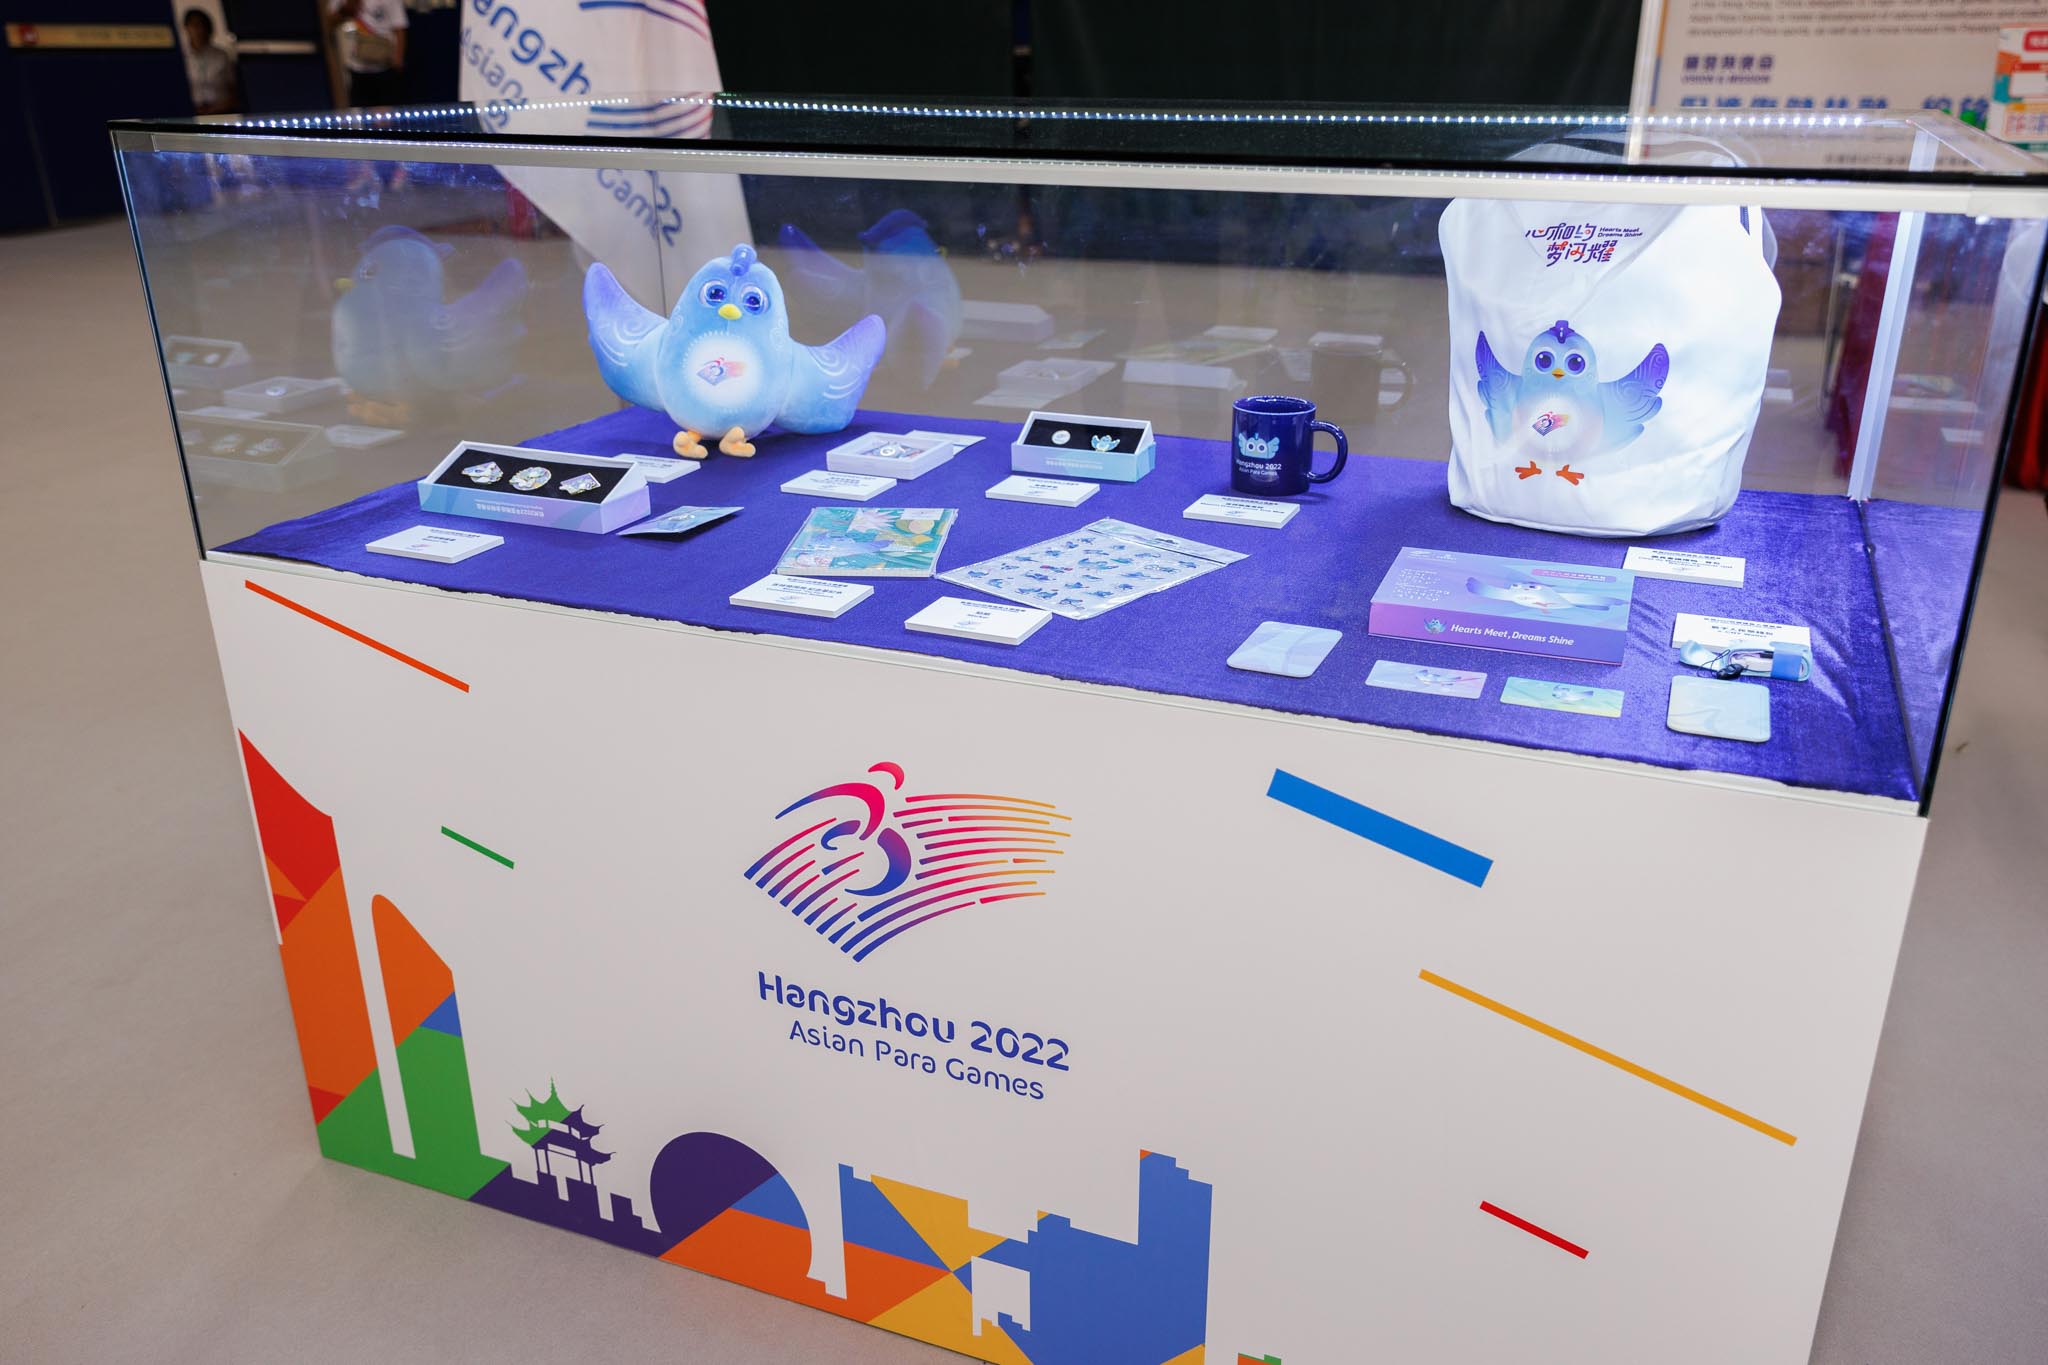 Embracing the theme of the 100 Days Countdown to Hangzhou 2022 Asian Para Games, the event showcased memorabilia from the games and past Asian Para Games medals. The Hangzhou 2022 Asian Para Games mascot "Fei Fei" made its debut appearance in Hong Kong, joining the Hongkongers in the countdown and promoting the spirit of the Asian Para Games while cheering on Hong Kong's athletes in advance.